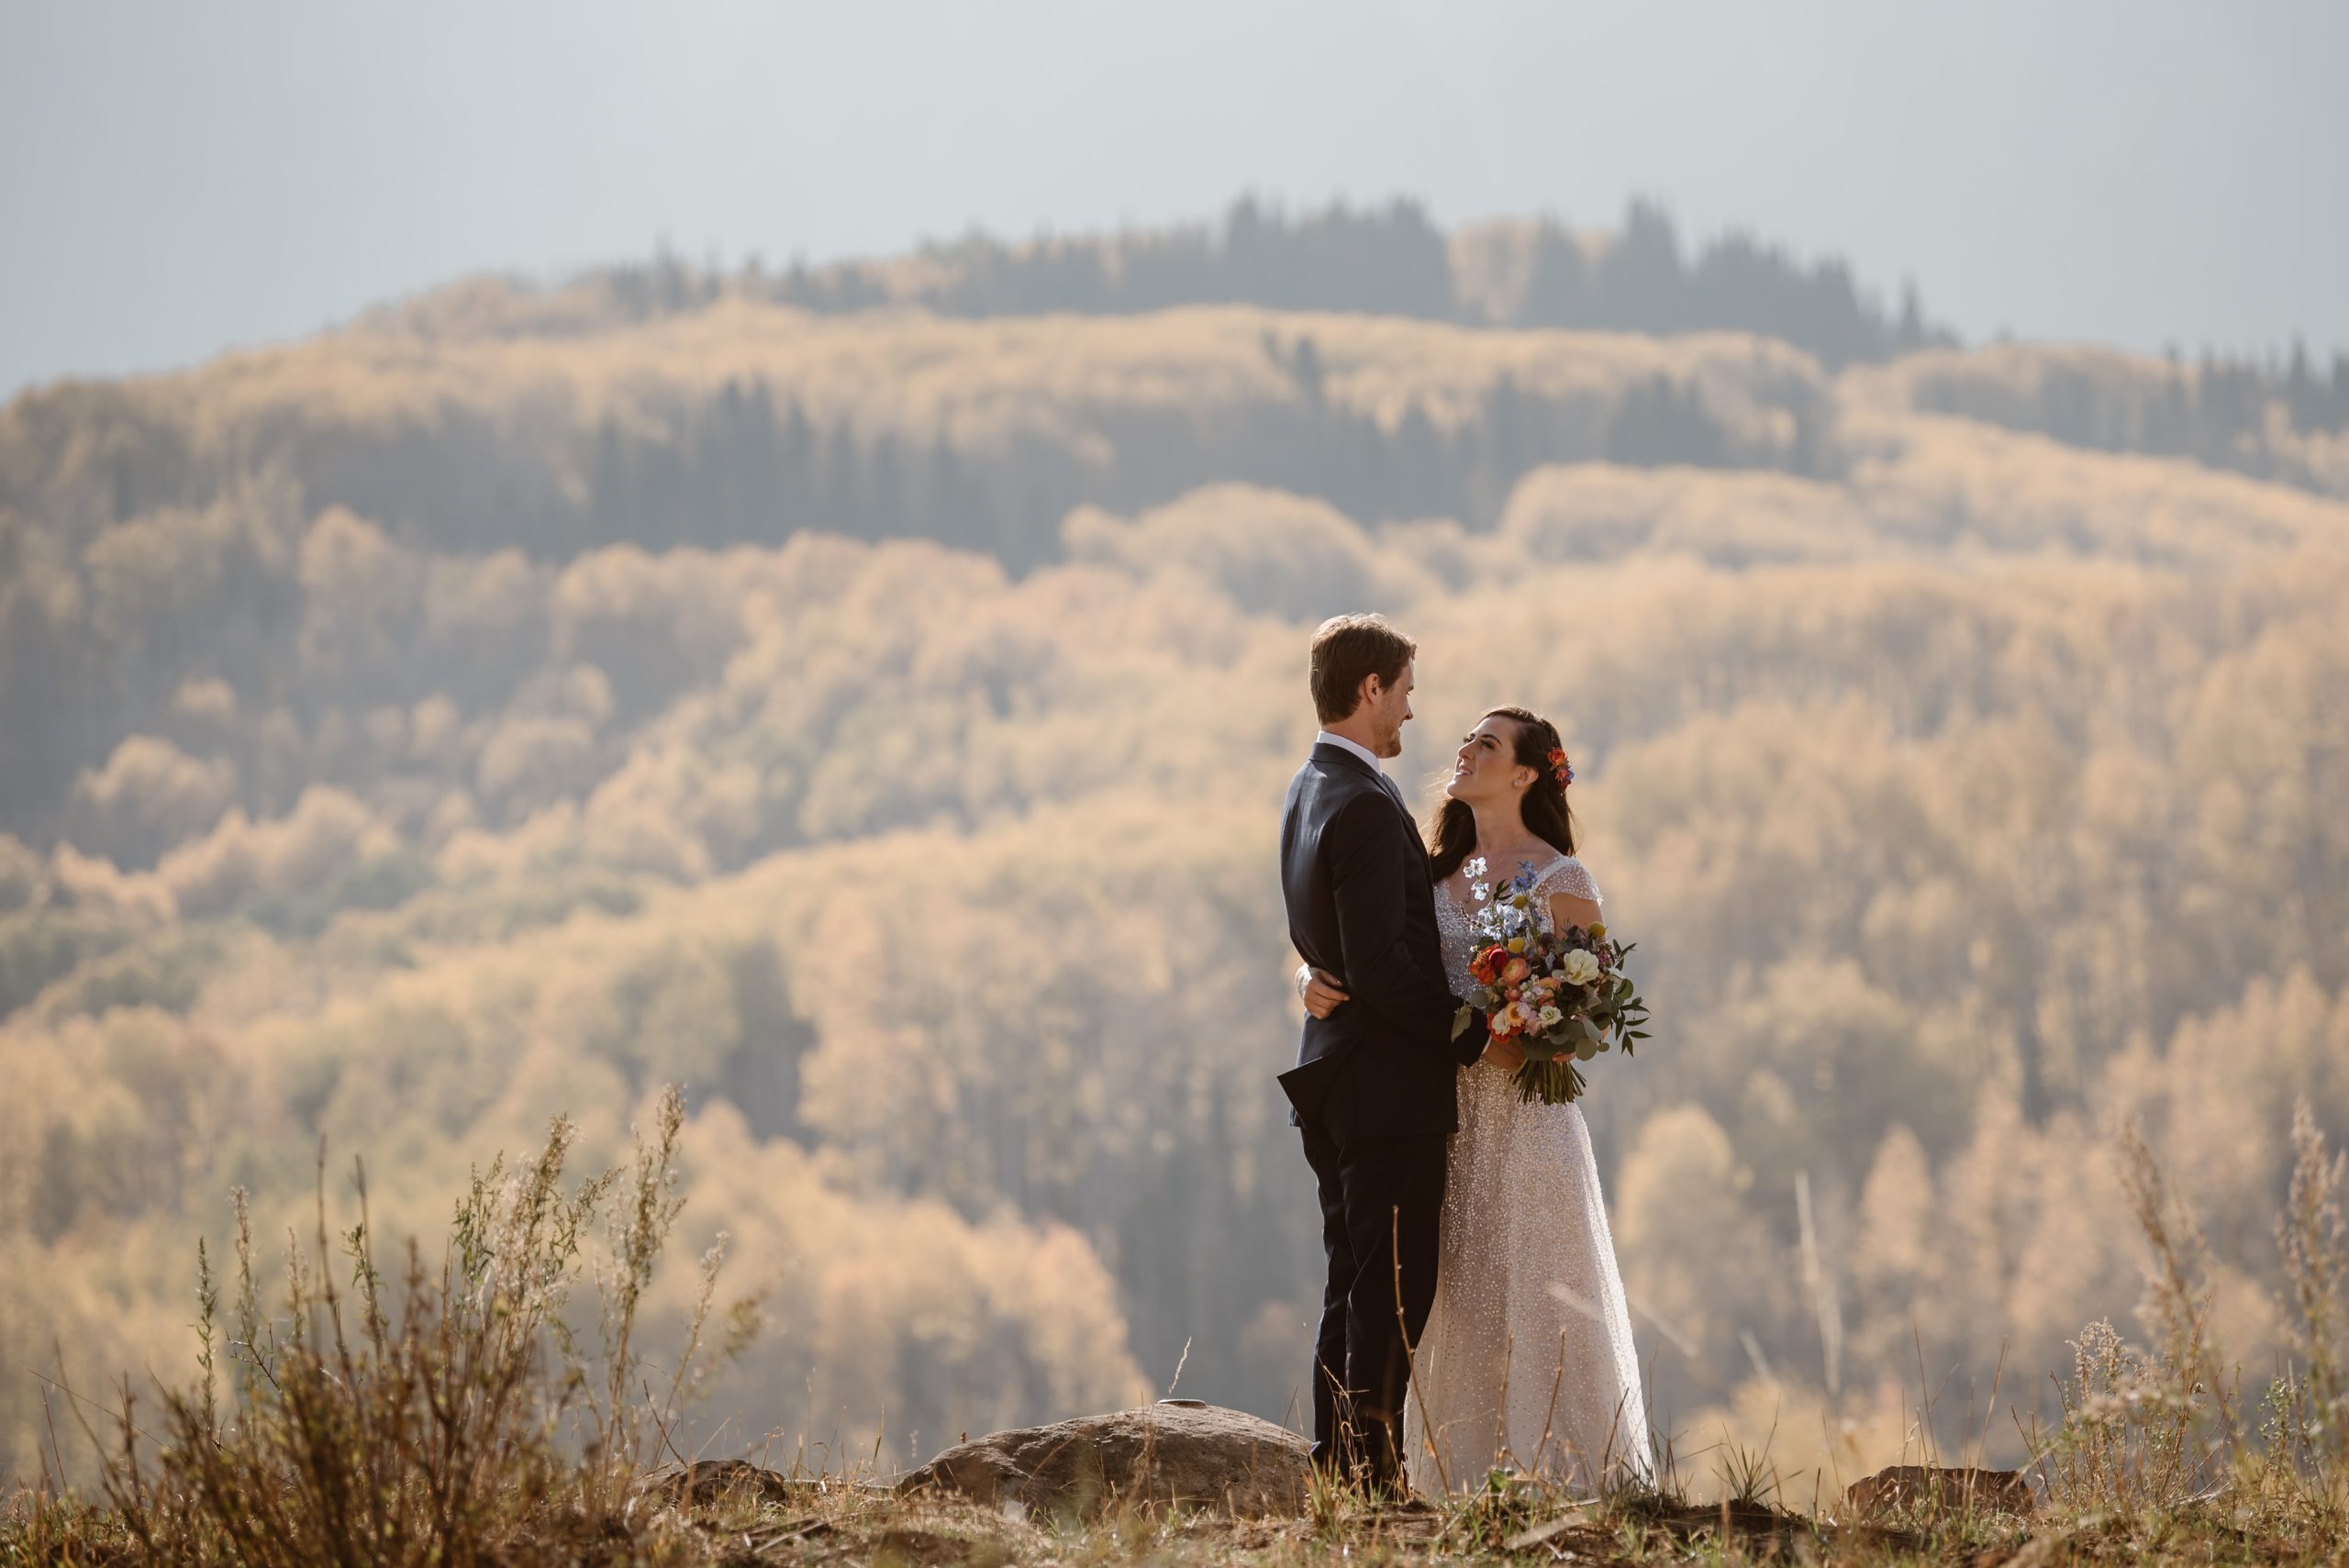 Bride and groom embrace, with forest and mountain in the background in Crested Butte, Colorado.